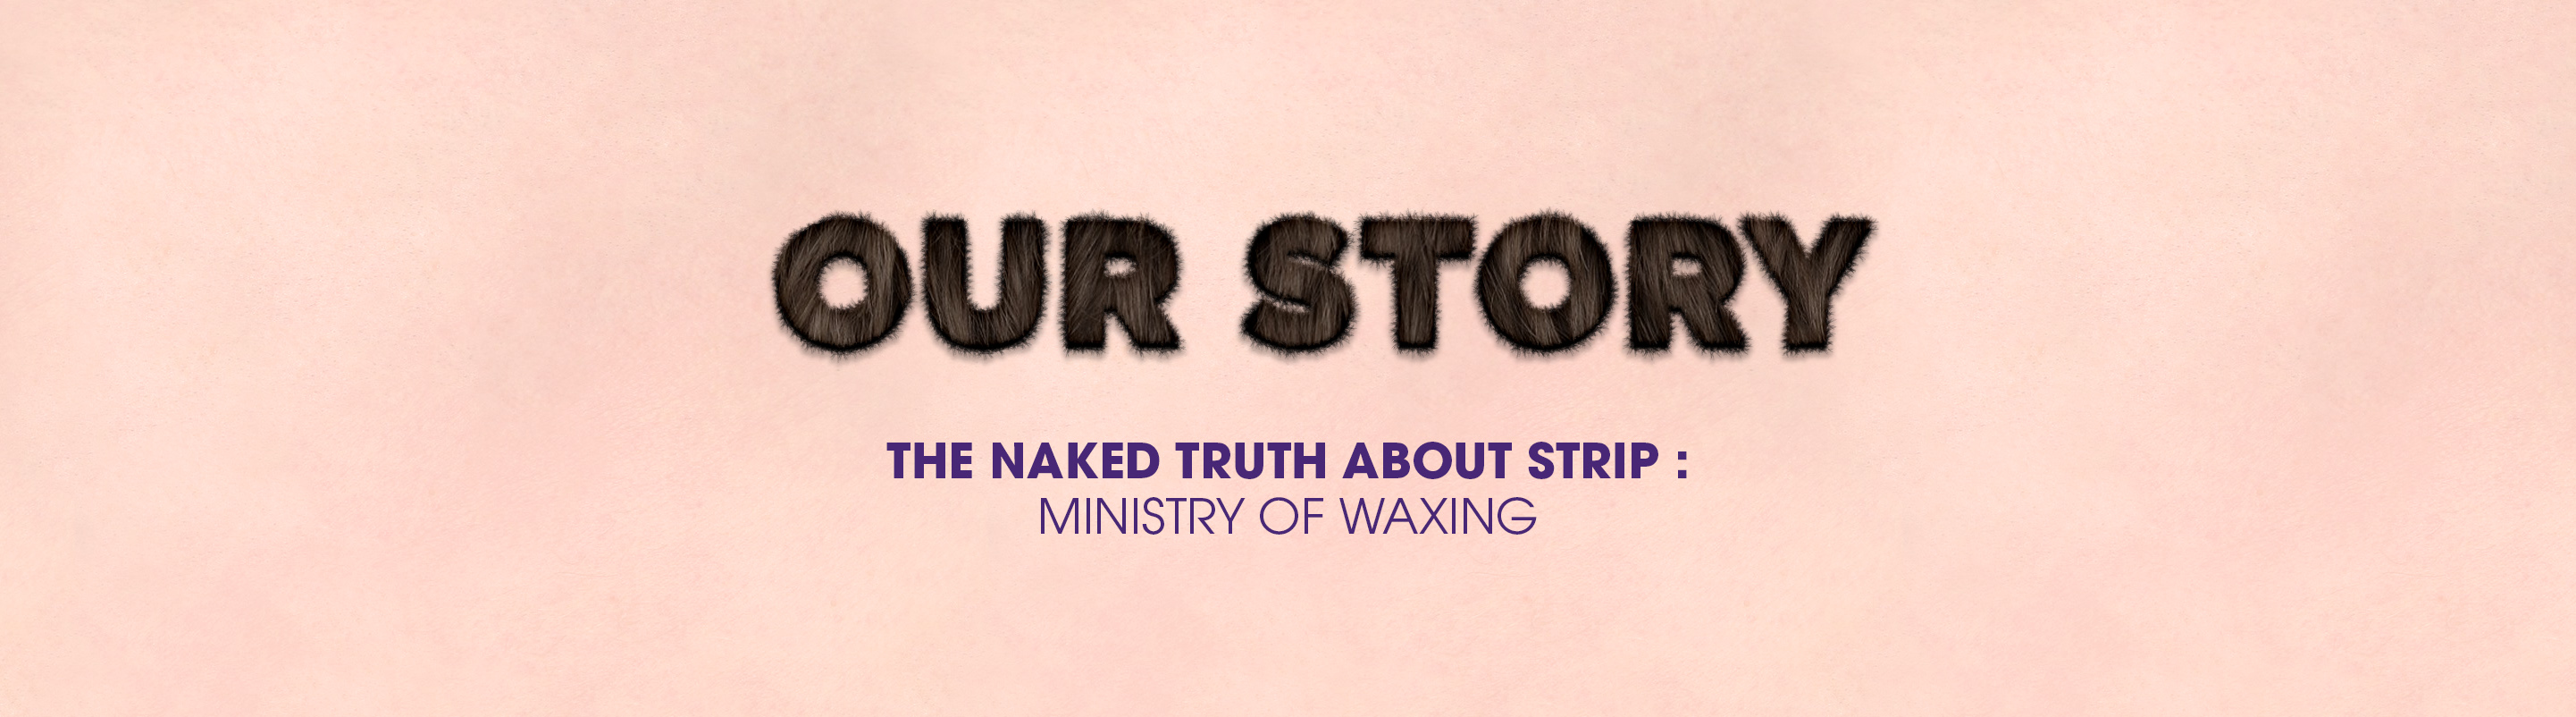 Our Story, The Naked Truth Behind Strip